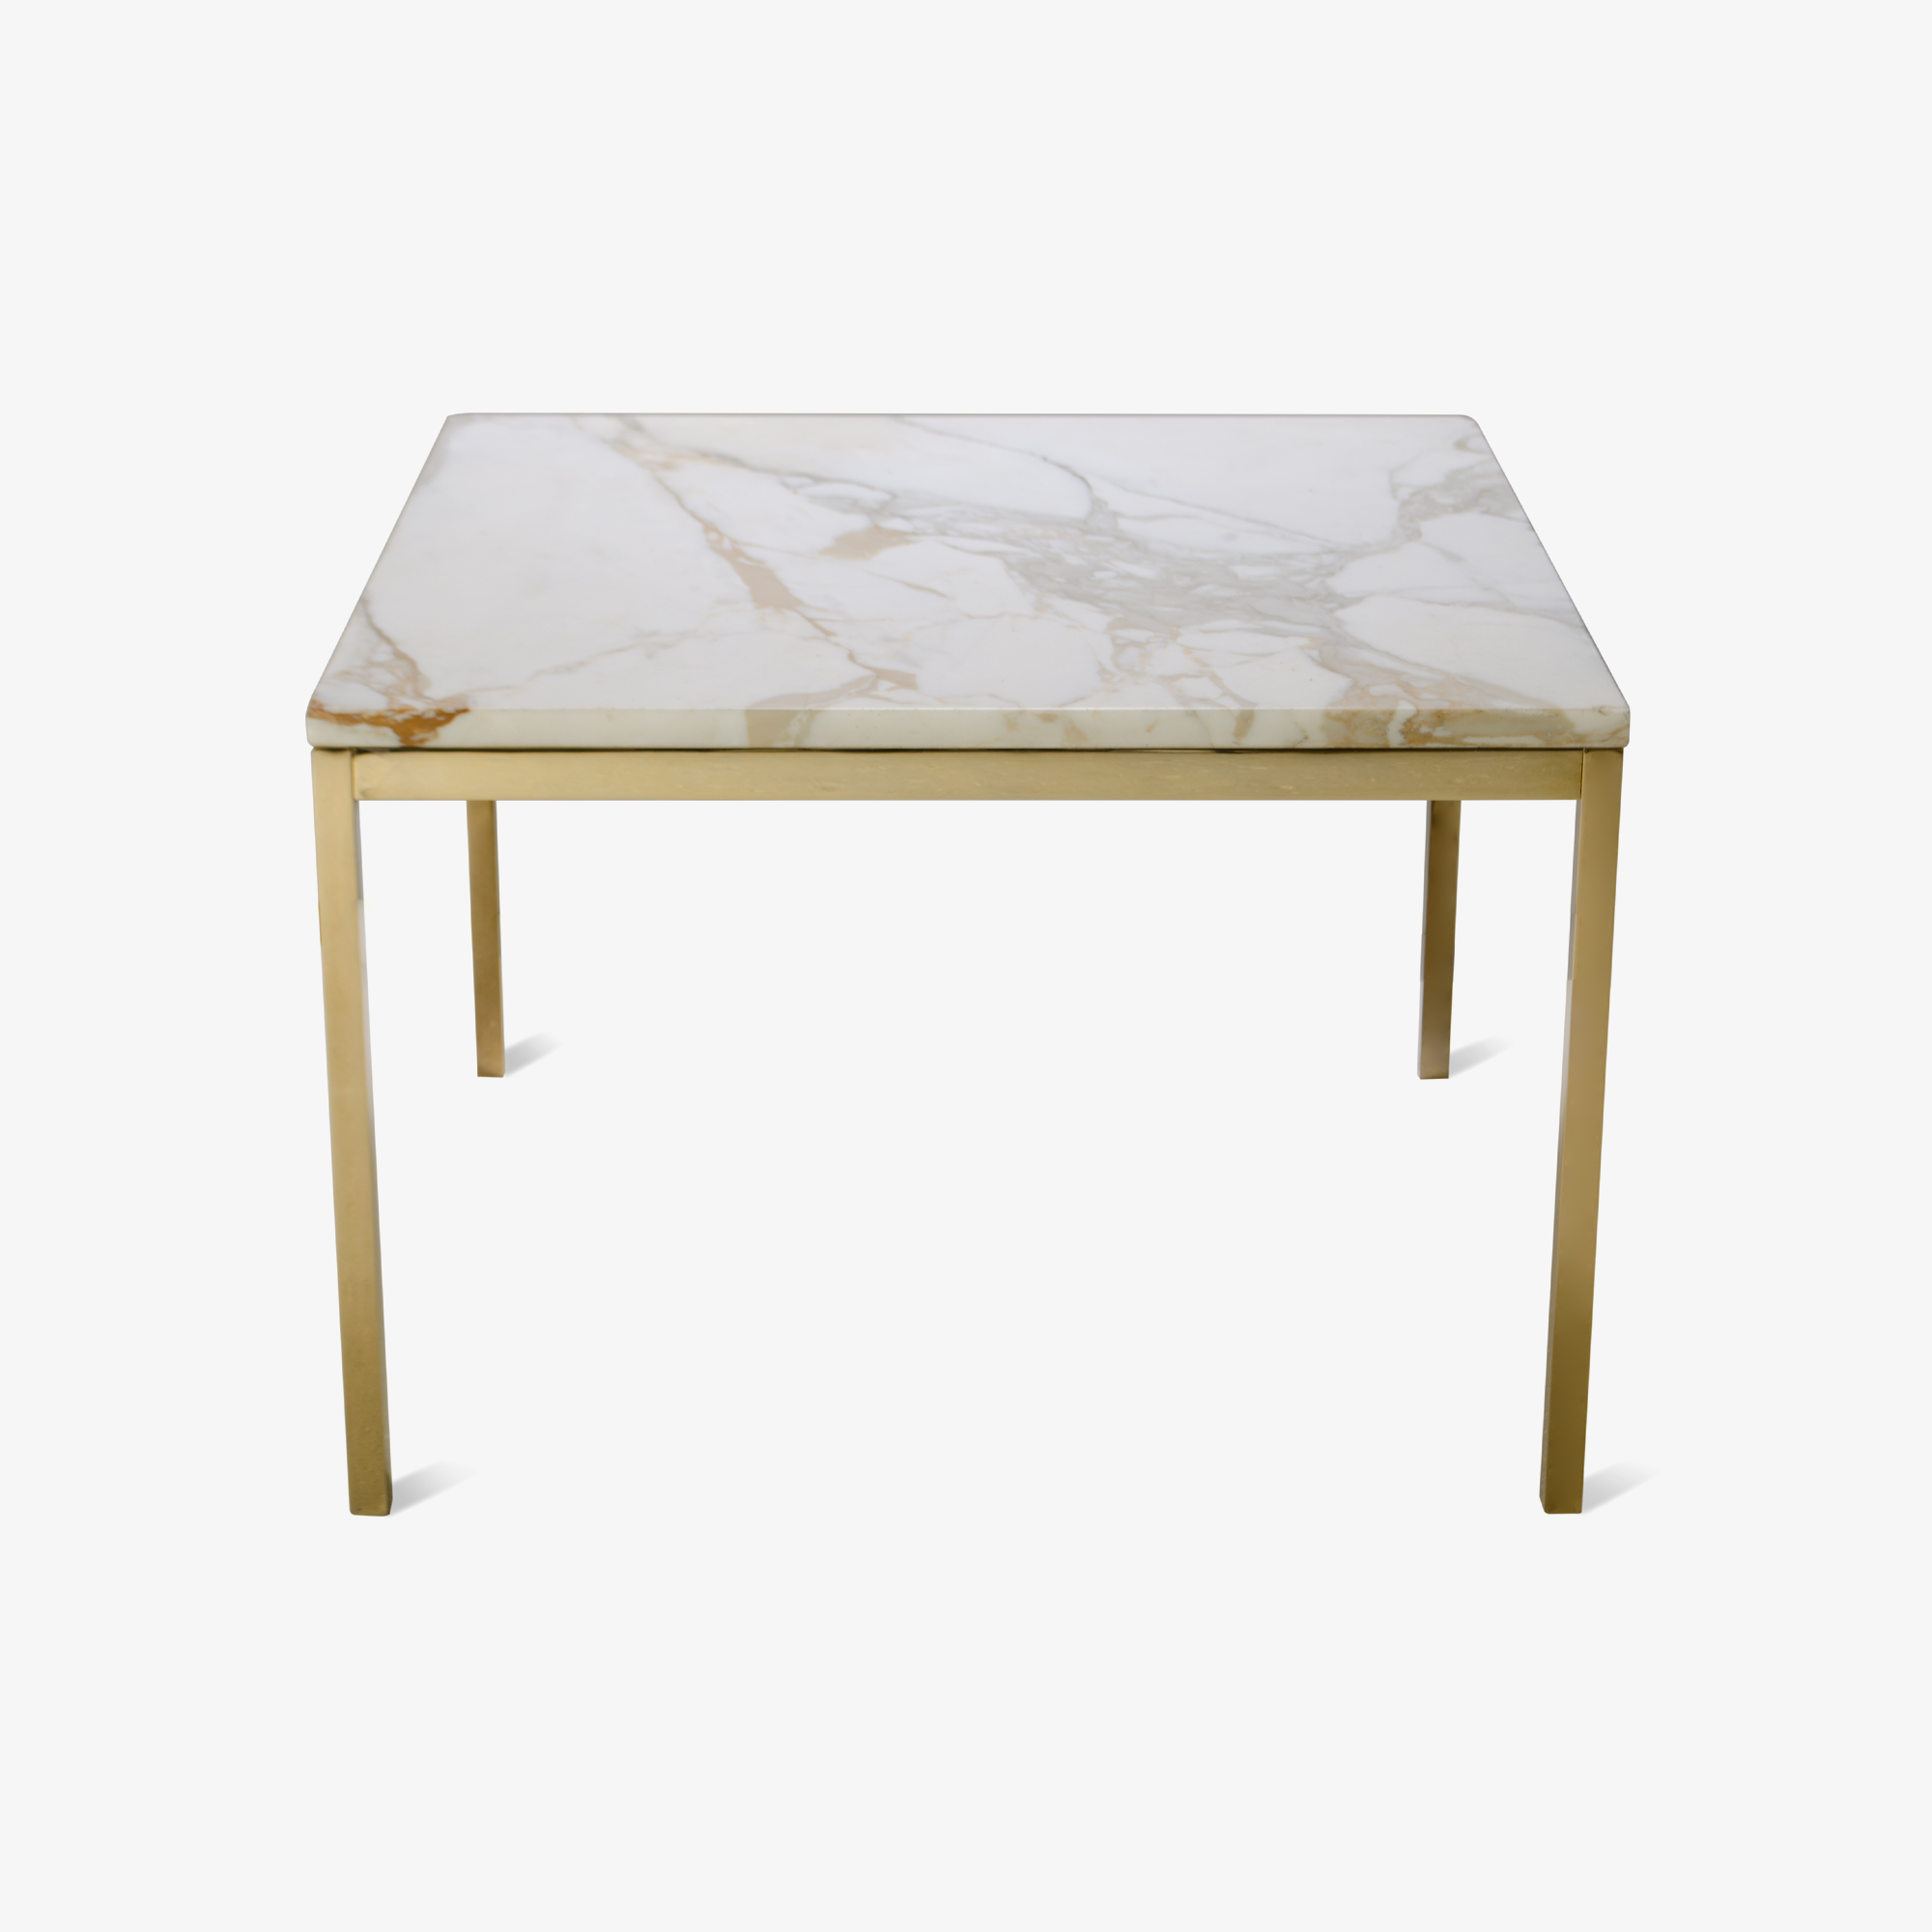 Florence Knoll Coffee Table with Calacatta Marble, 24k Gold Edition.png